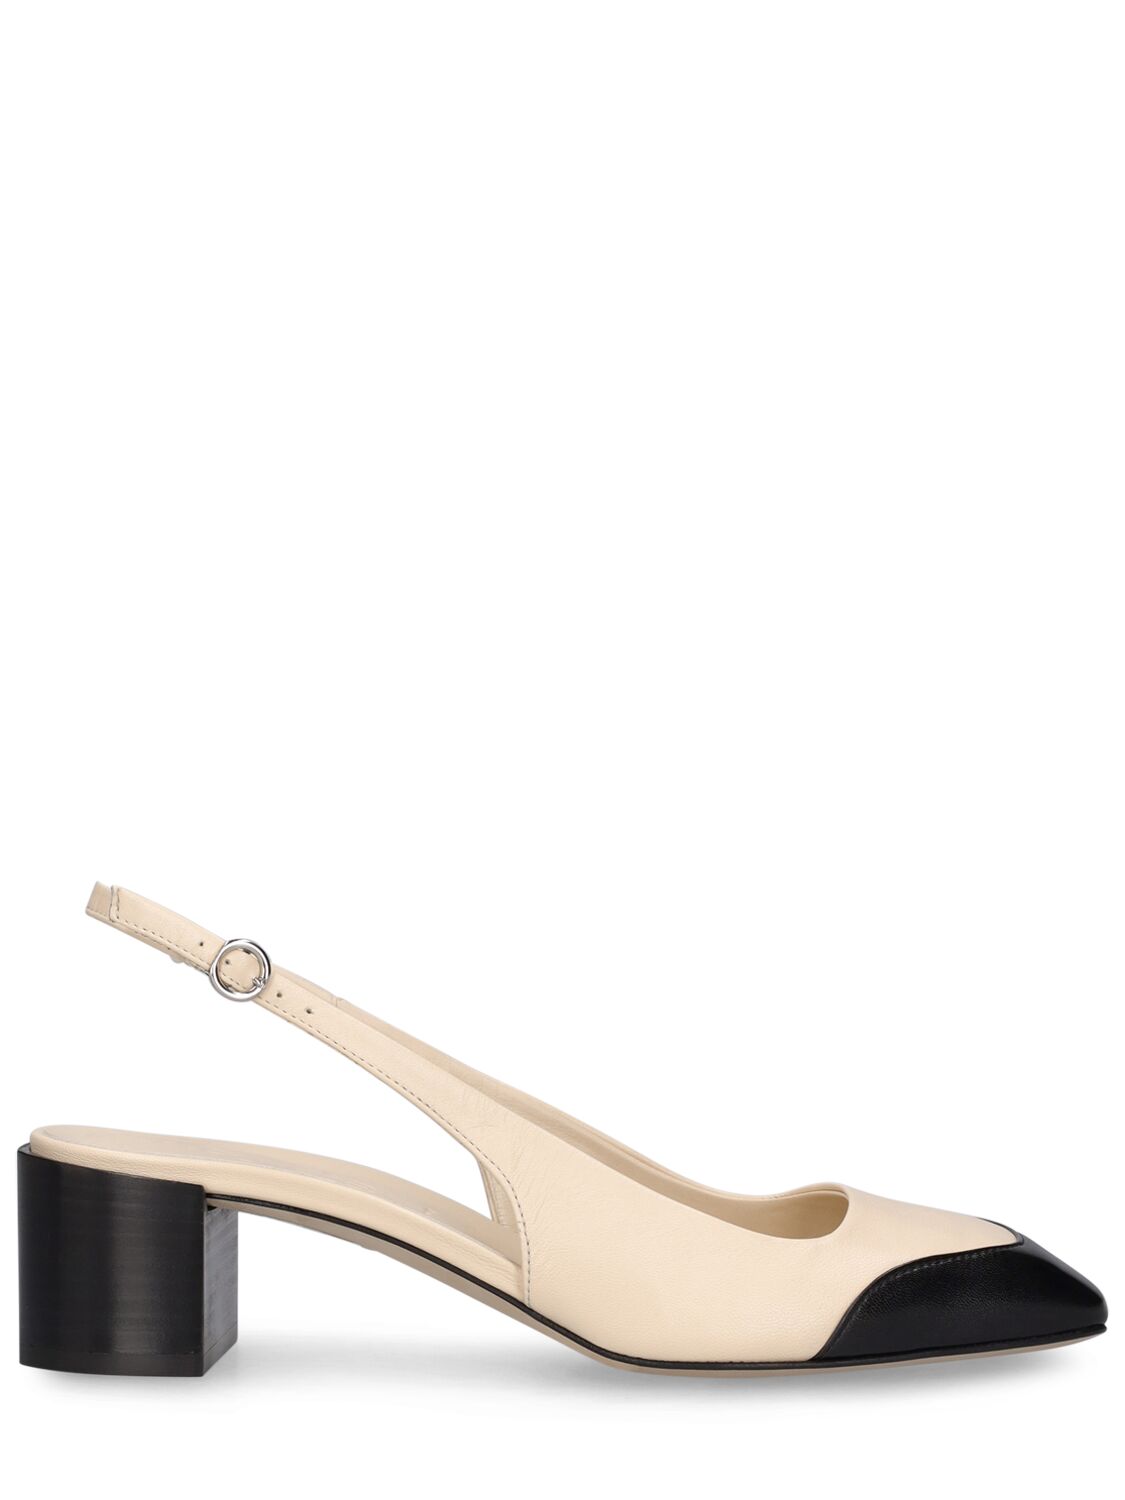 Aeyde 45mm Augusta Nappa Leather Heels In Creamy,black